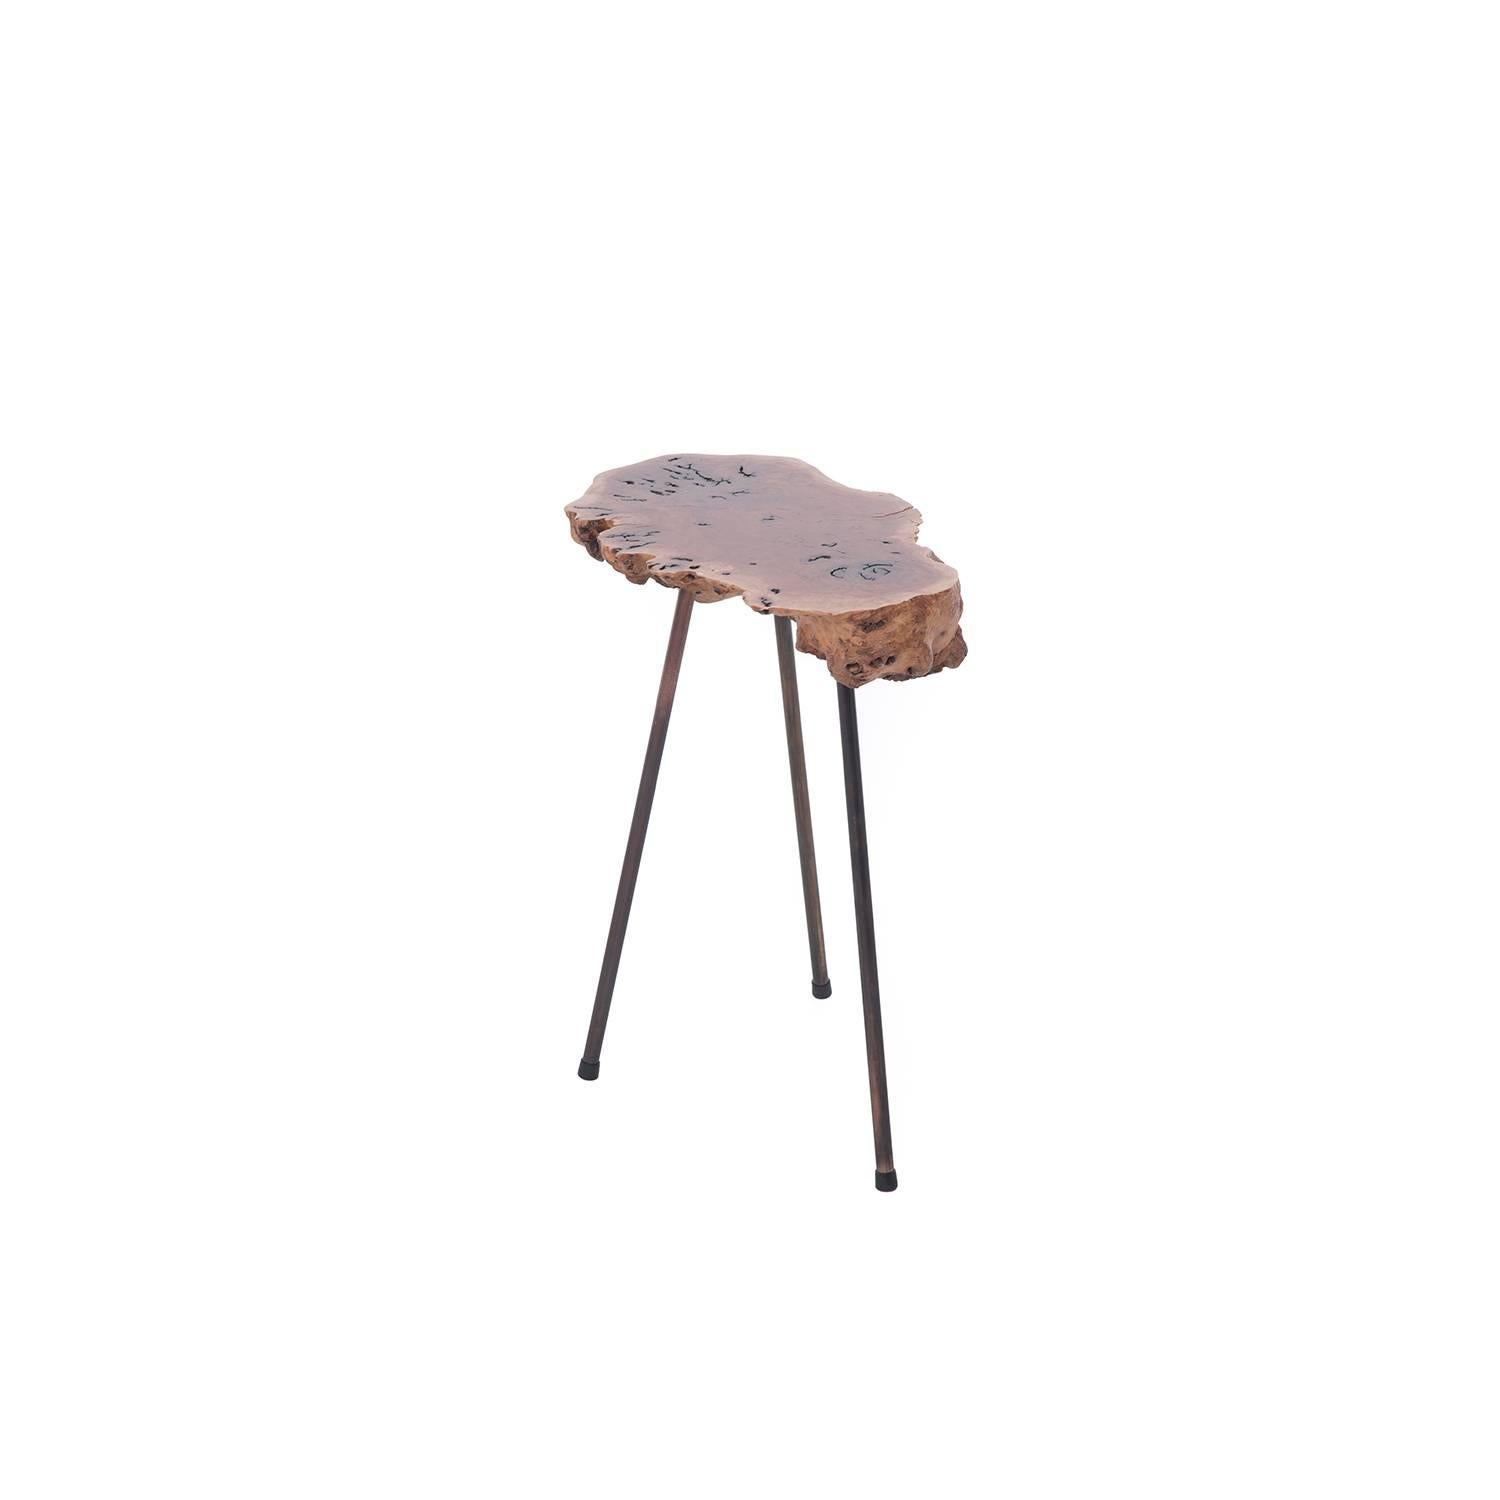 This newly produced redwood burl side table by makes a statement, but also a great cocktail support system. One of three, sold separately.